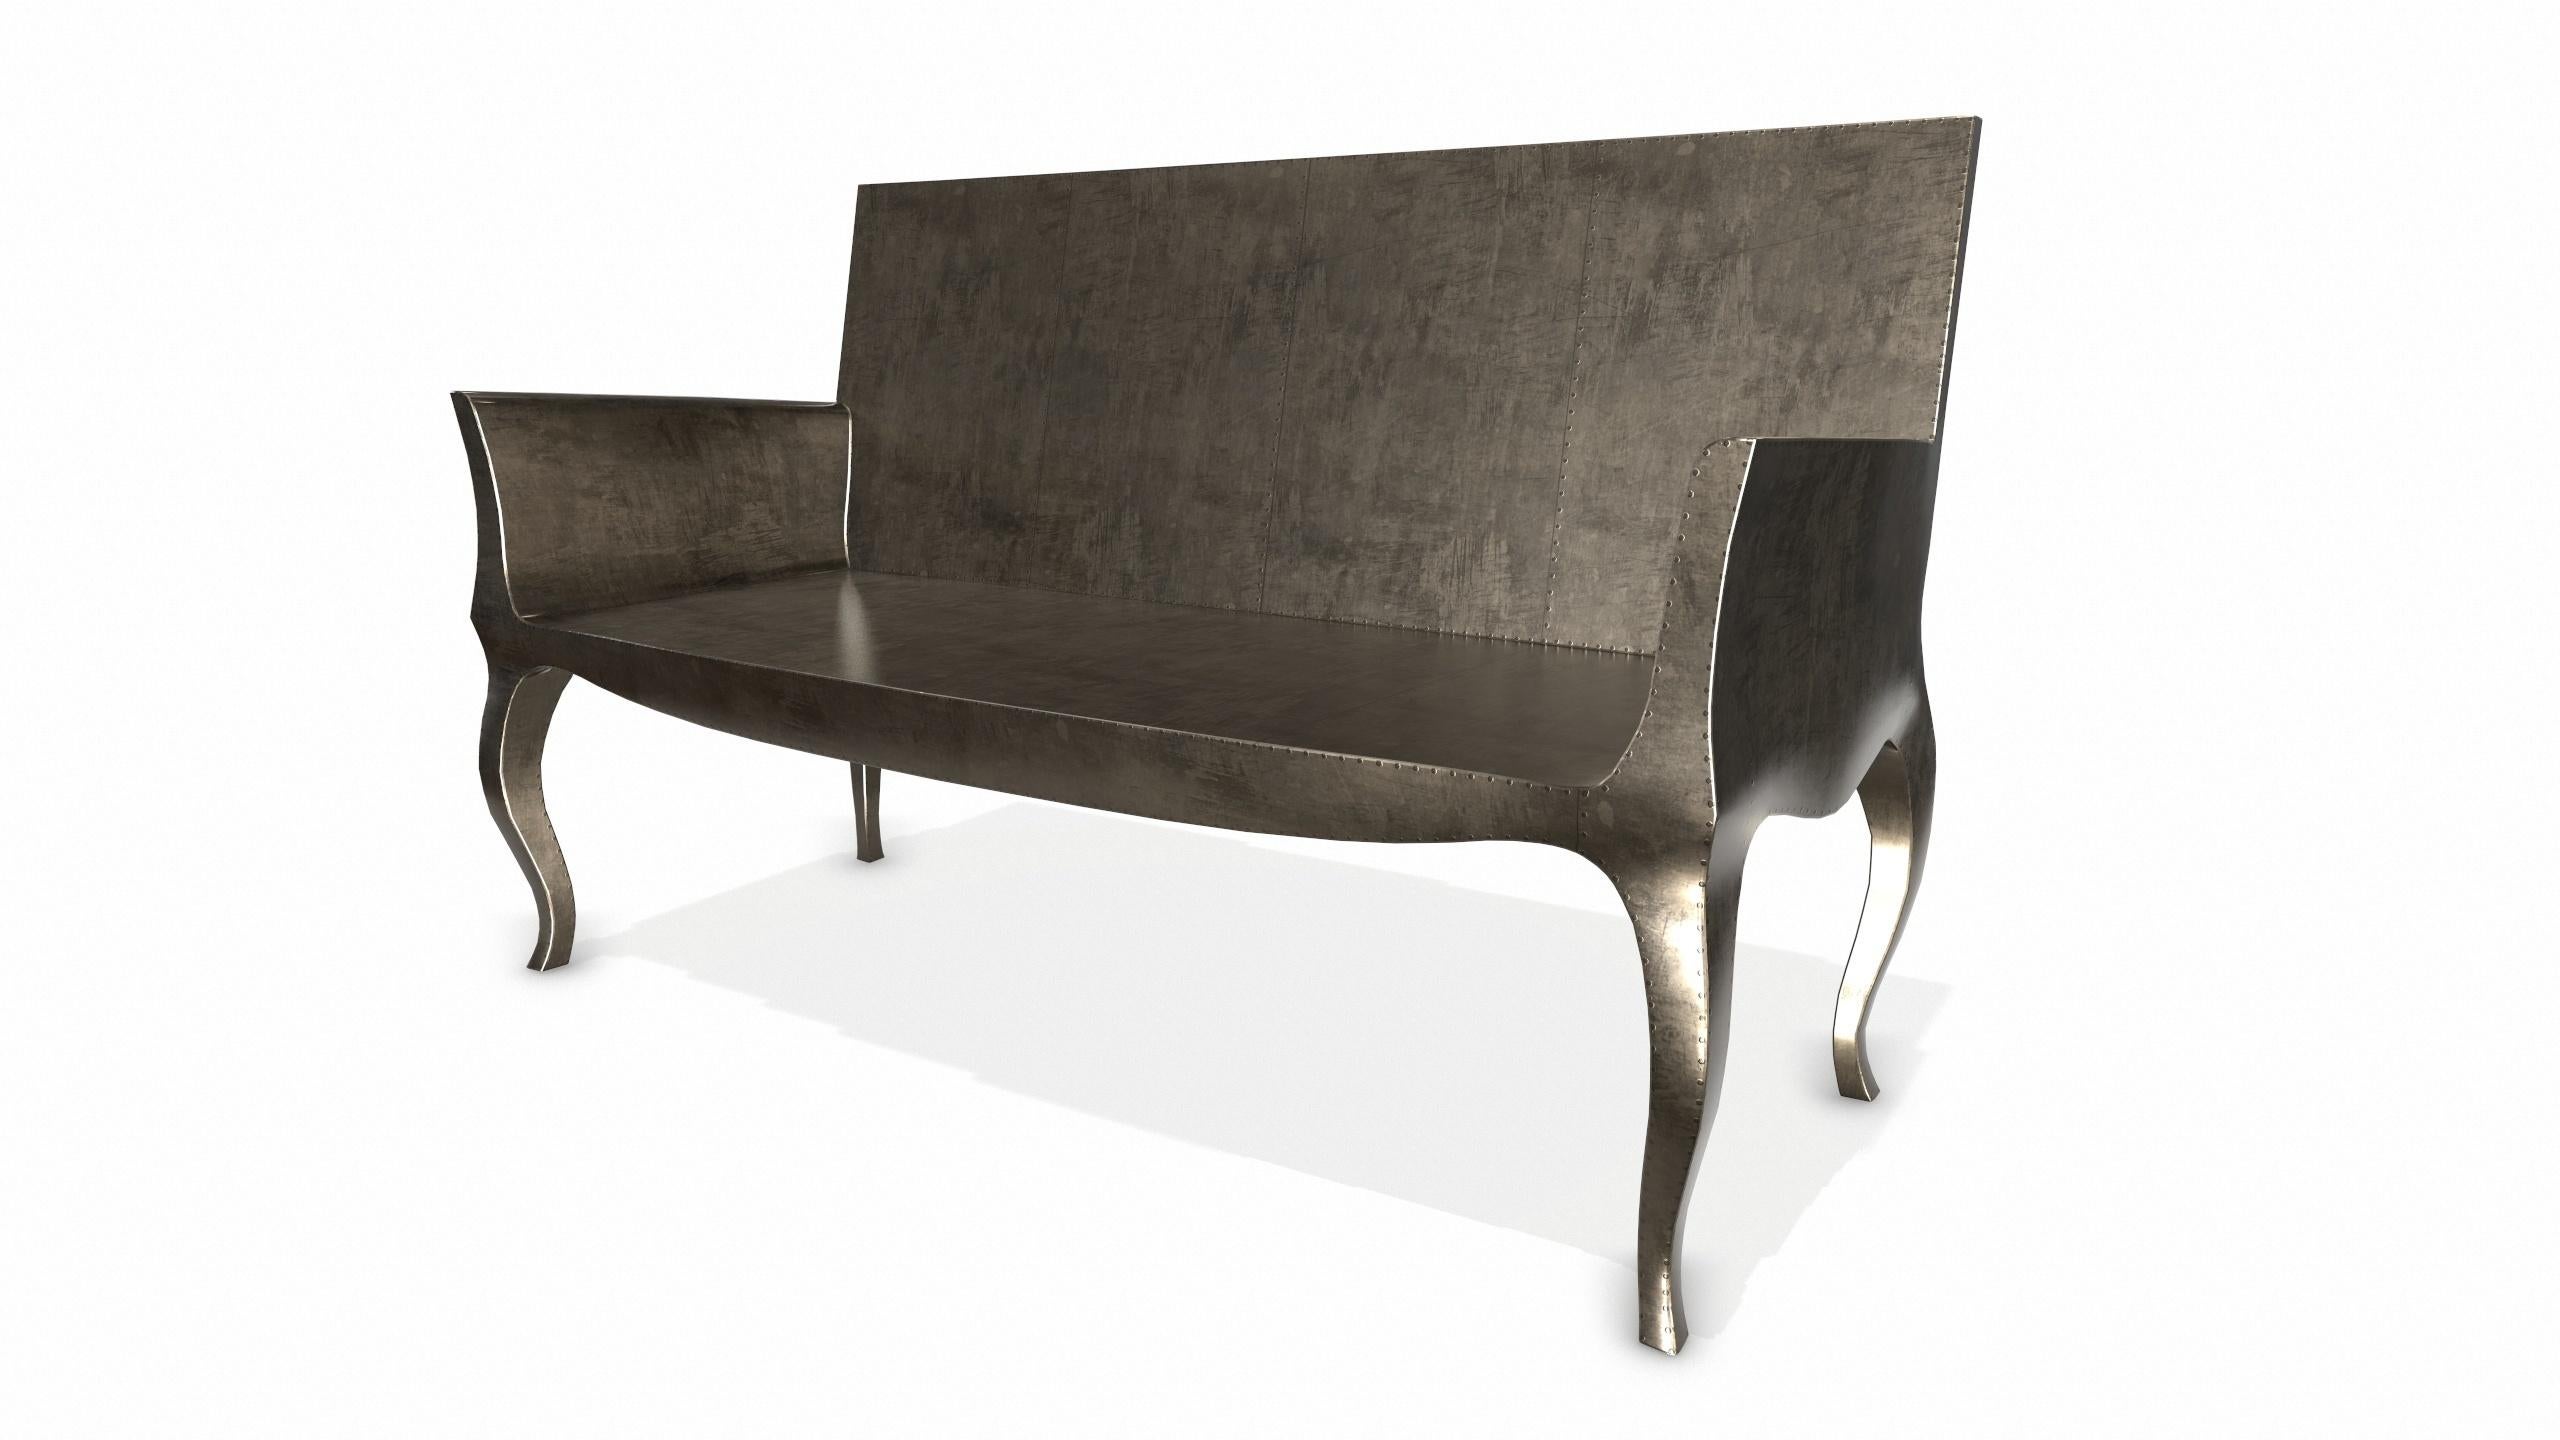 American Louise Settee Art Deco Chaise Longues in Smooth Antique Bronze by Paul Mathieu For Sale